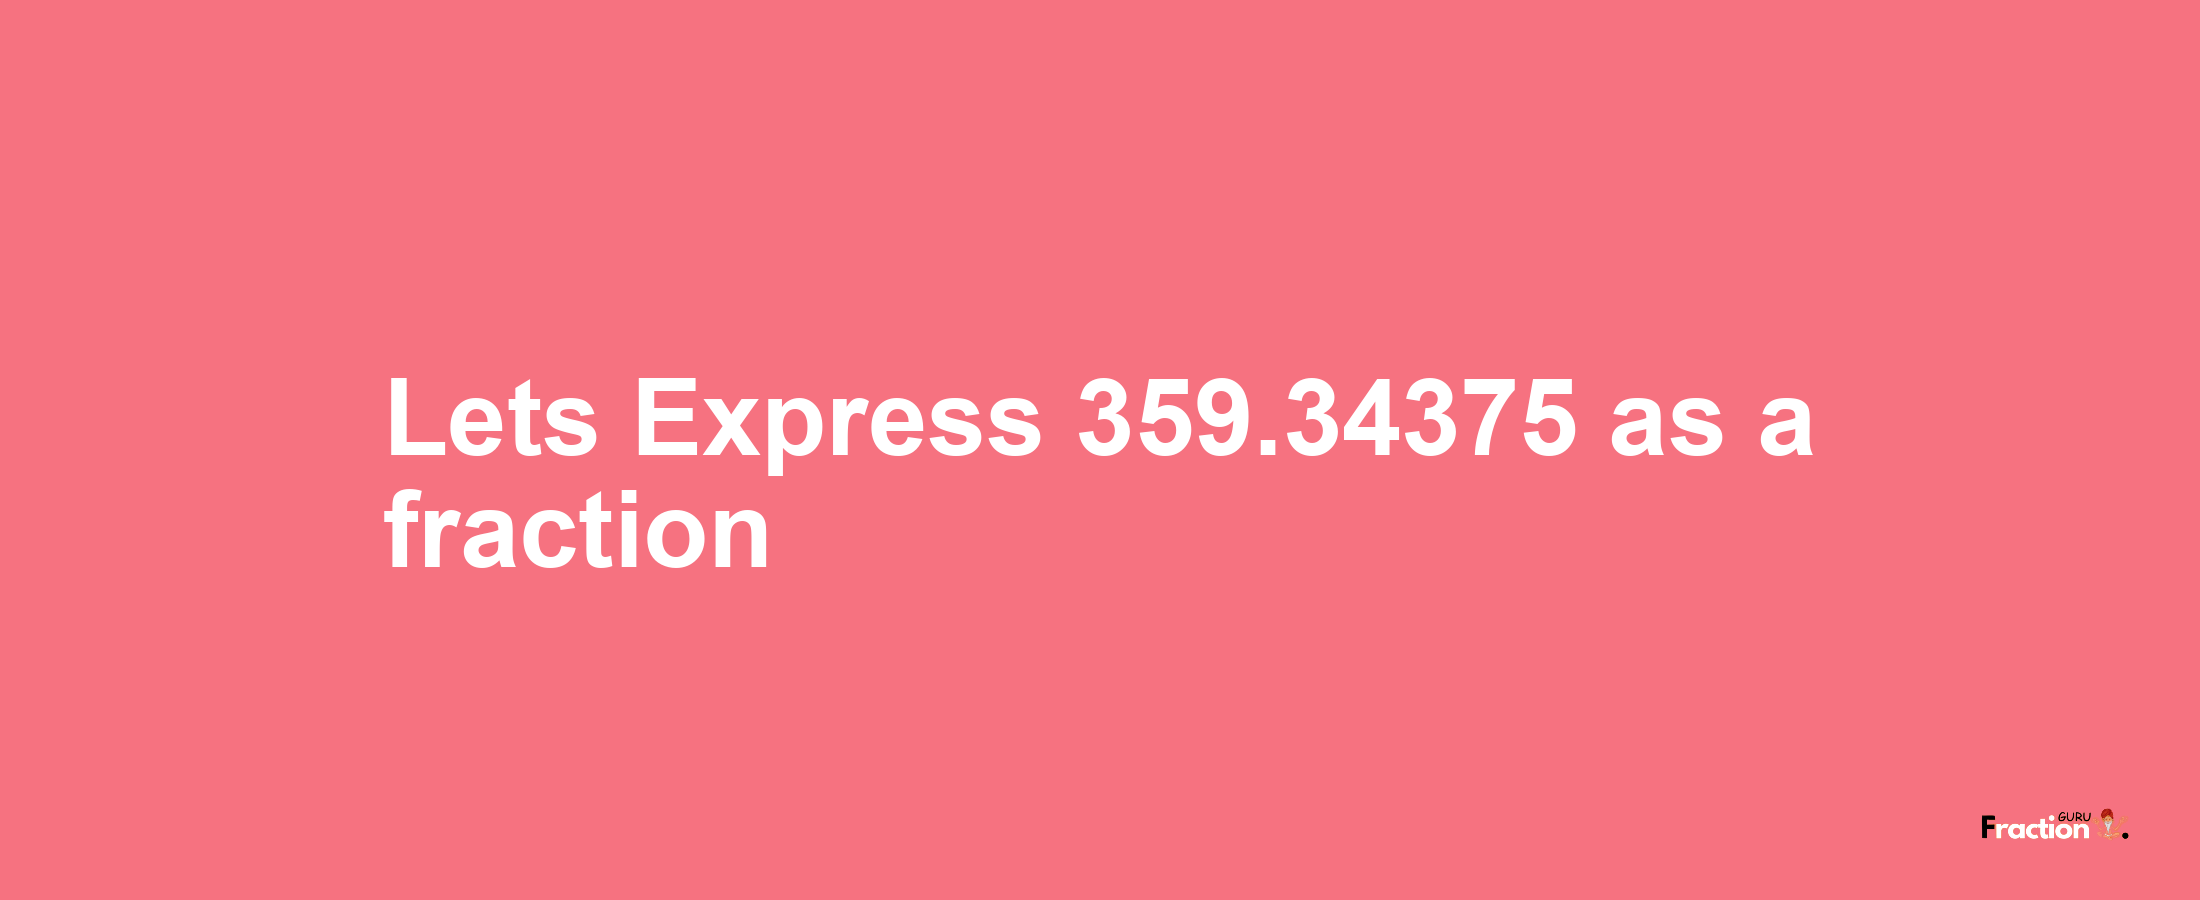 Lets Express 359.34375 as afraction